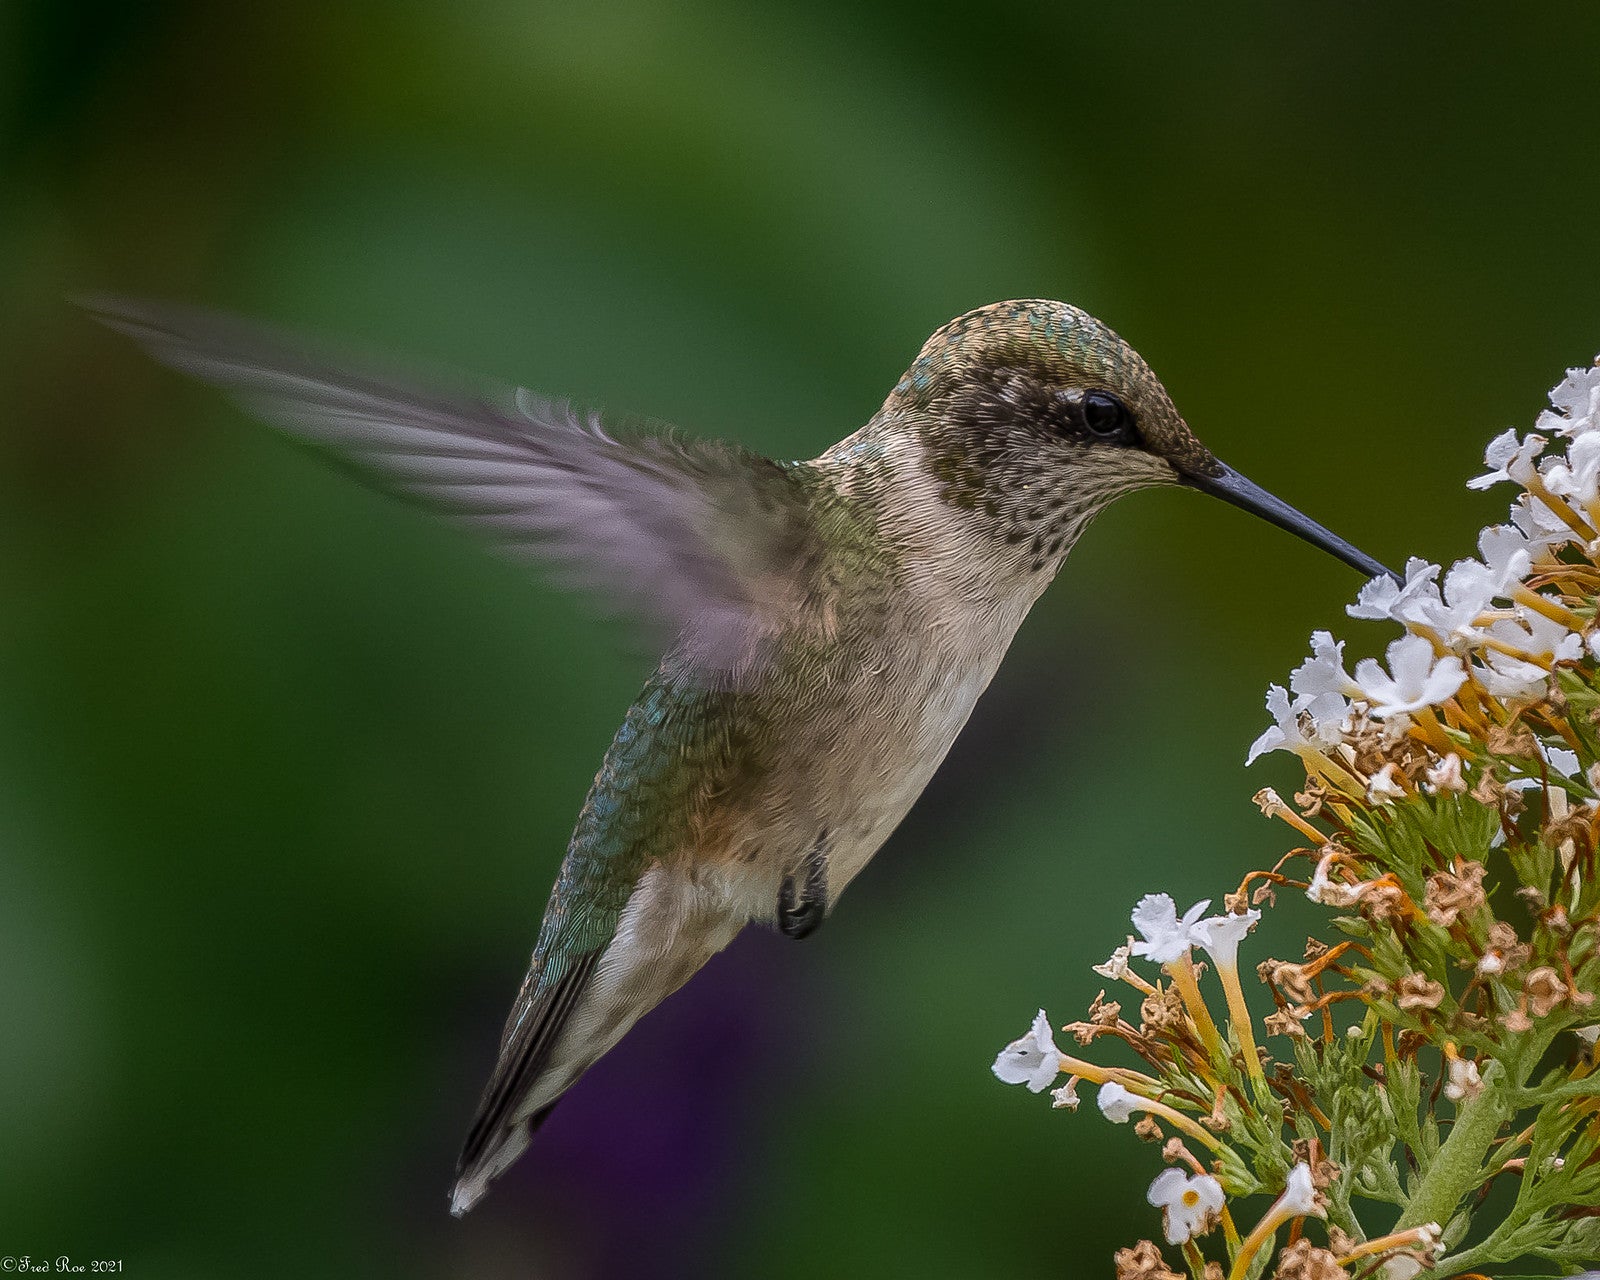 a hummingbird drinks from a cluster of flowers.